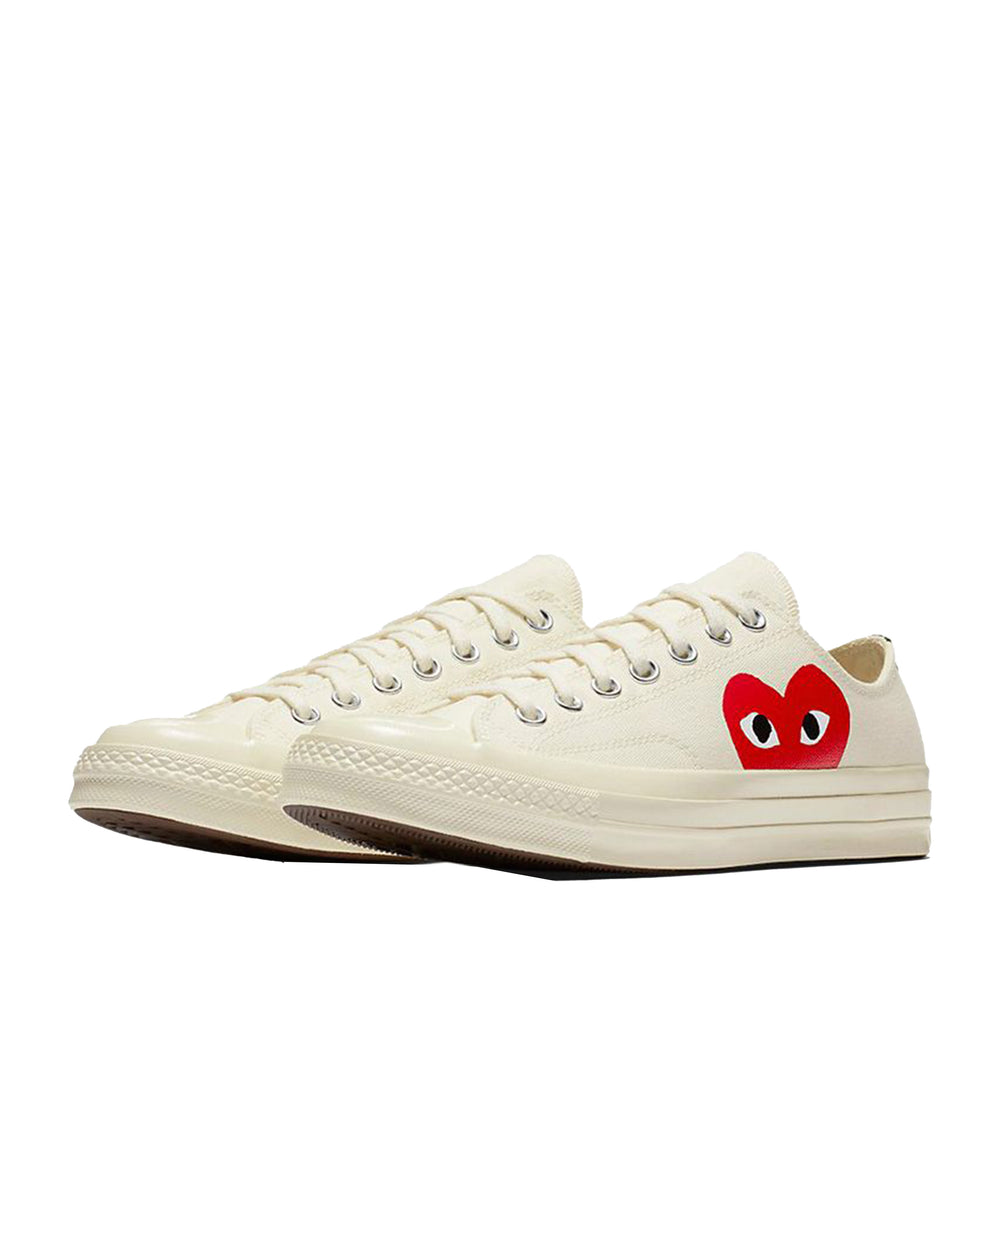 Mareo puño Ejército Converse X Comme Des Garcons Play Chuck 70 Low | STASHED